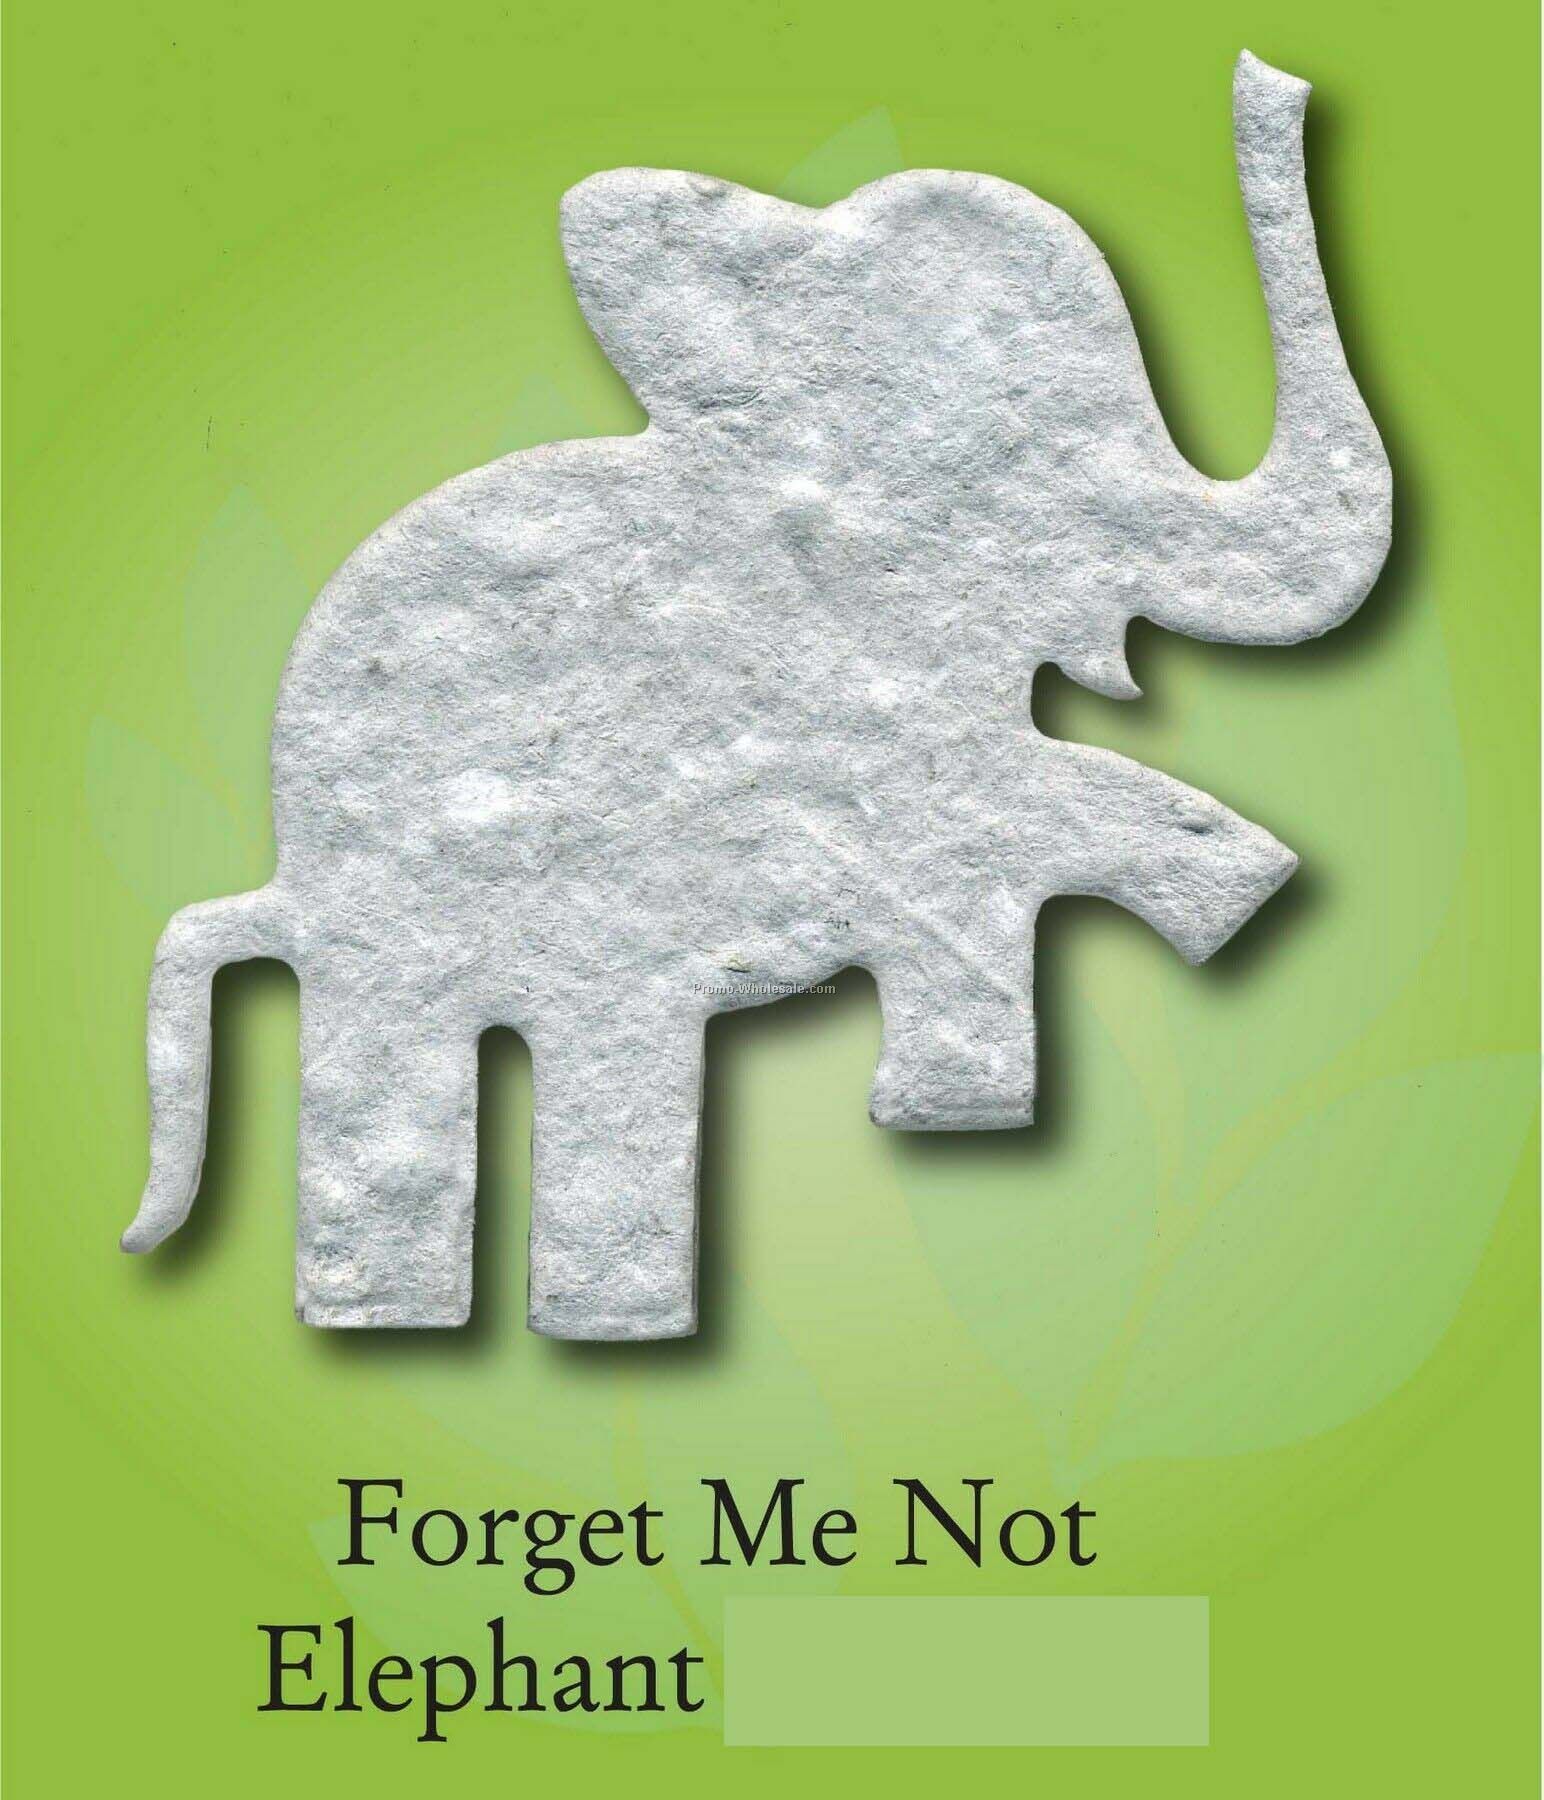 Forget Me Not Elephant Ornament W/ Embedded Seed